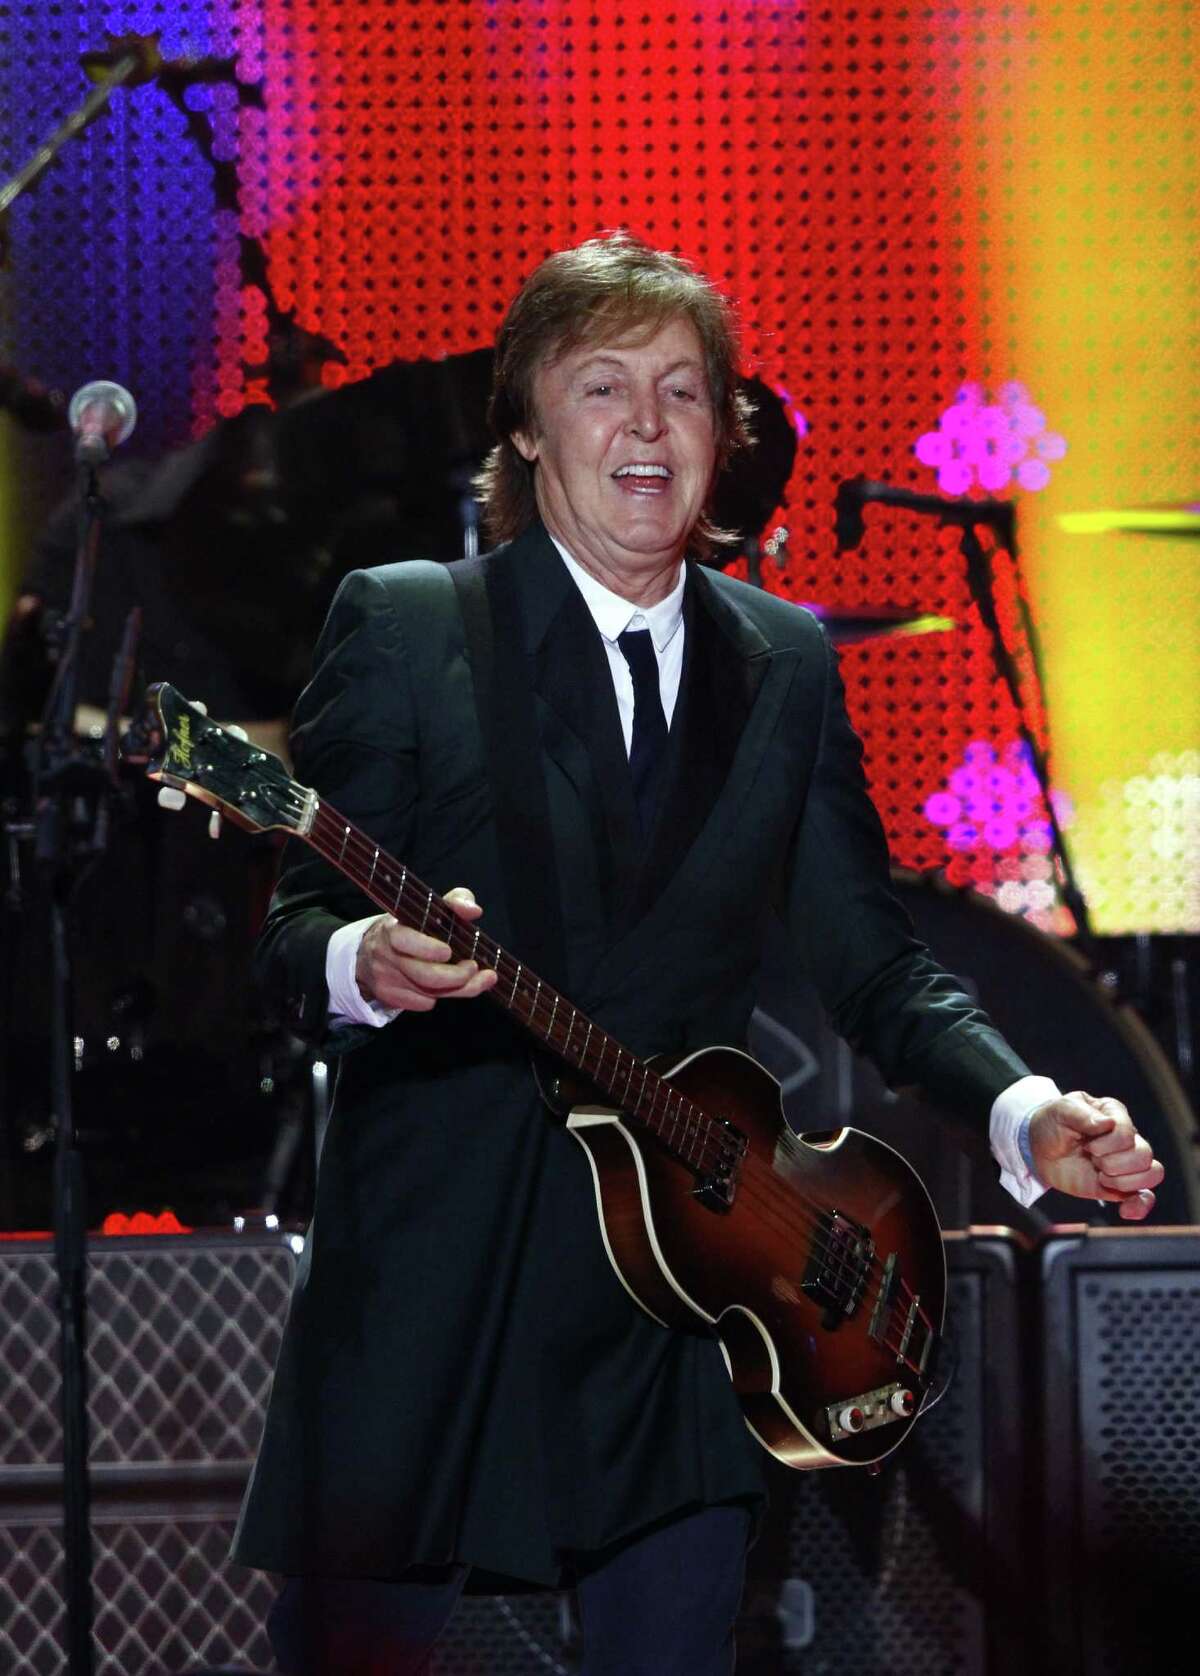 Paul McCartney performs on Day 2 of the 2013 Bonnaroo Music and Arts Festival on Friday, June 14, 2013 in Manchester, Tenn. (Photo by Wade Payne/Invision/AP)